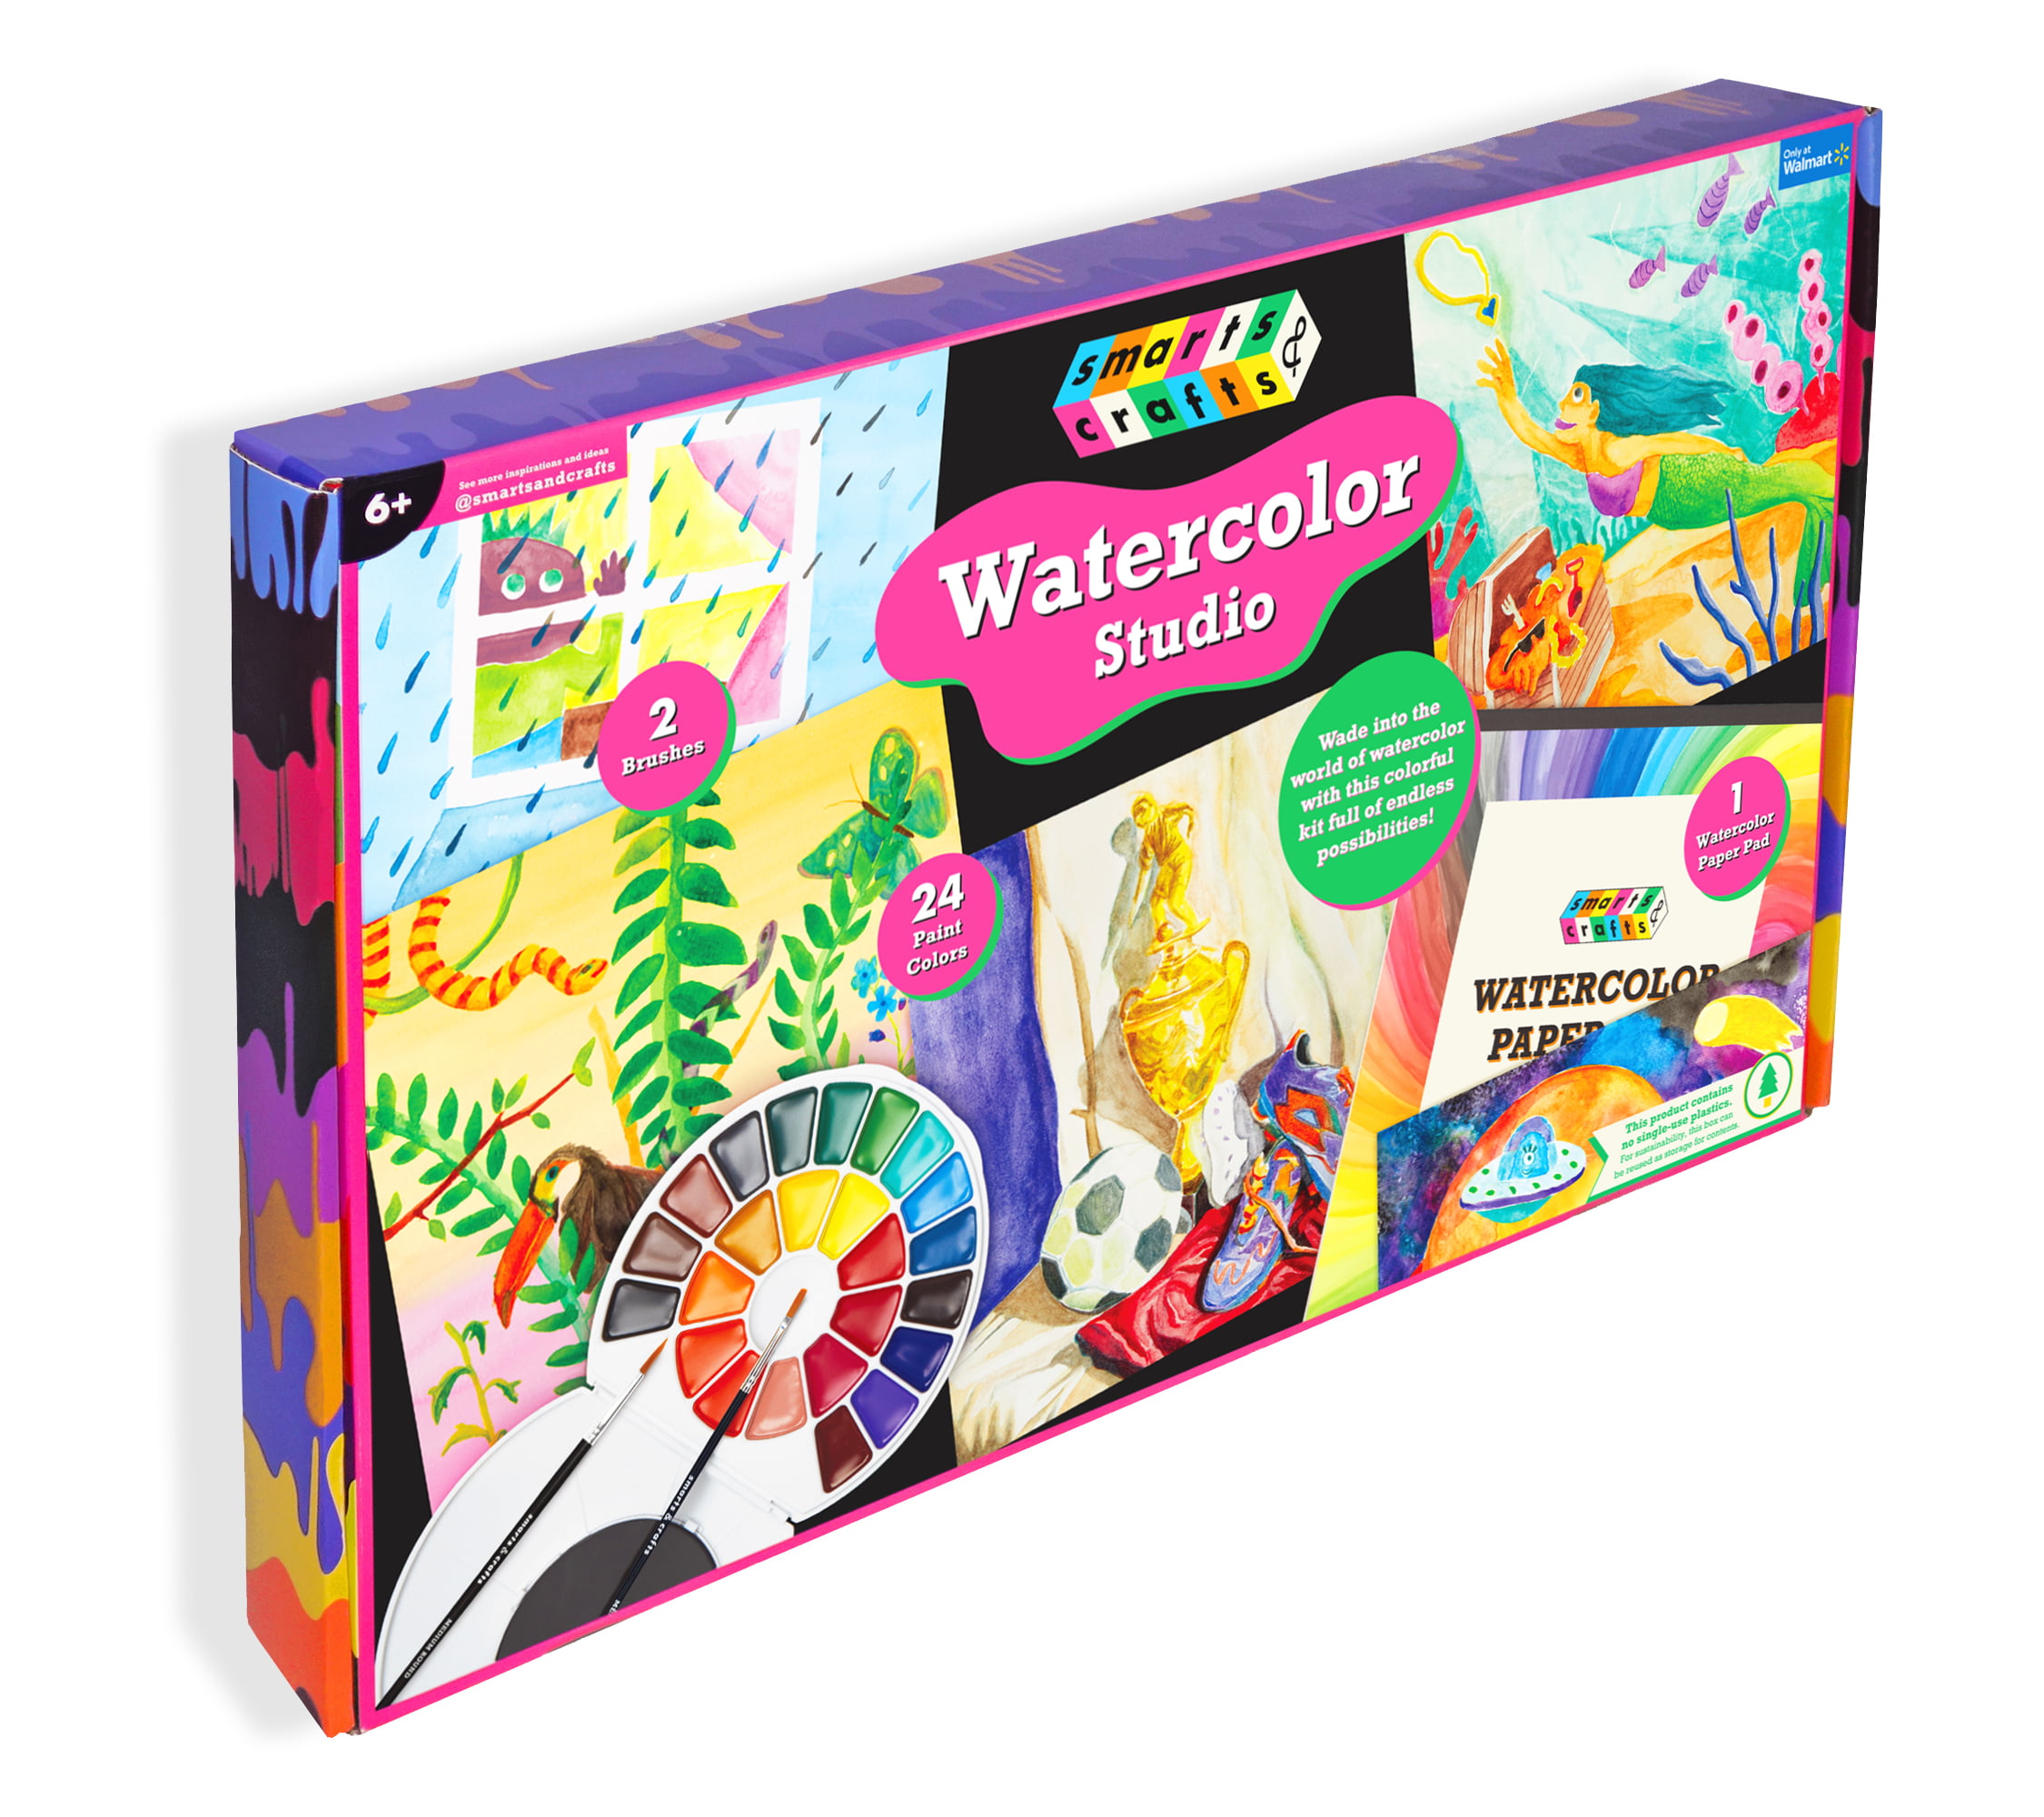  DIY Watercolor Kit - Learn to Paint: Includes Instructions &  Supplies • Award-Winning Watercolor Class in a Box for Beginners • Gift Set  for Kids, Adults, Teens : Arts, Crafts & Sewing